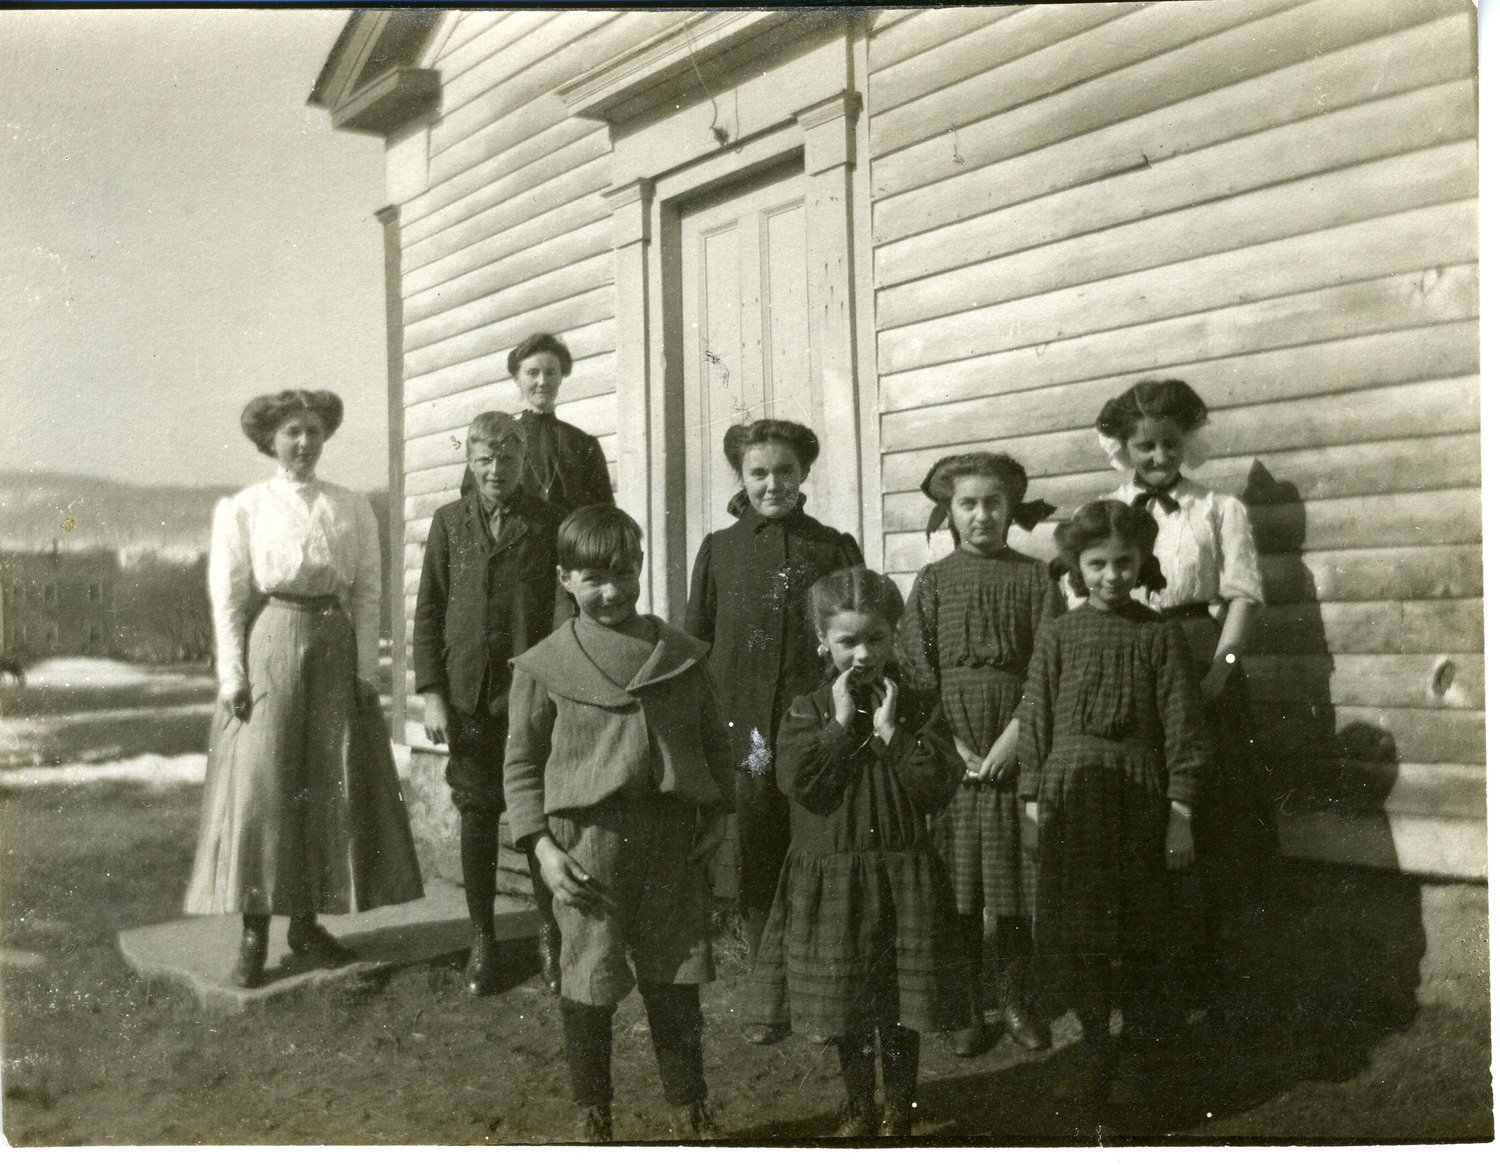 Dewittville School in the early 20th century.